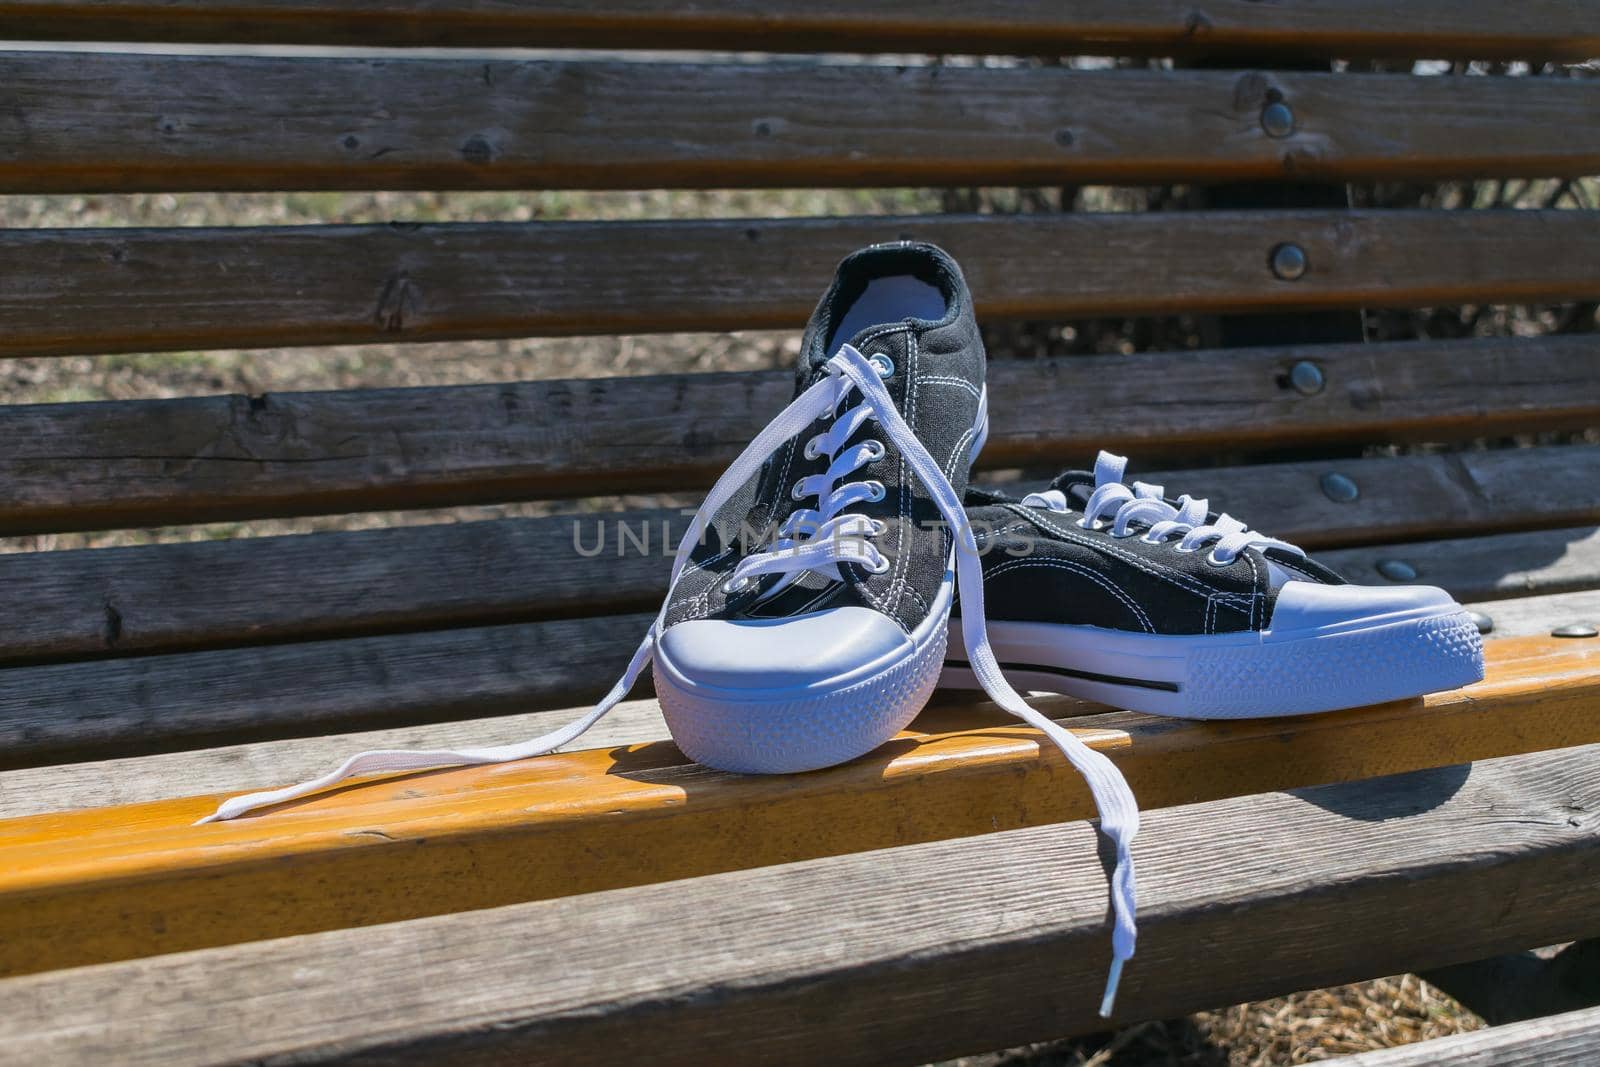 New sports sneakers for walking or running, lie on a park bench in summer